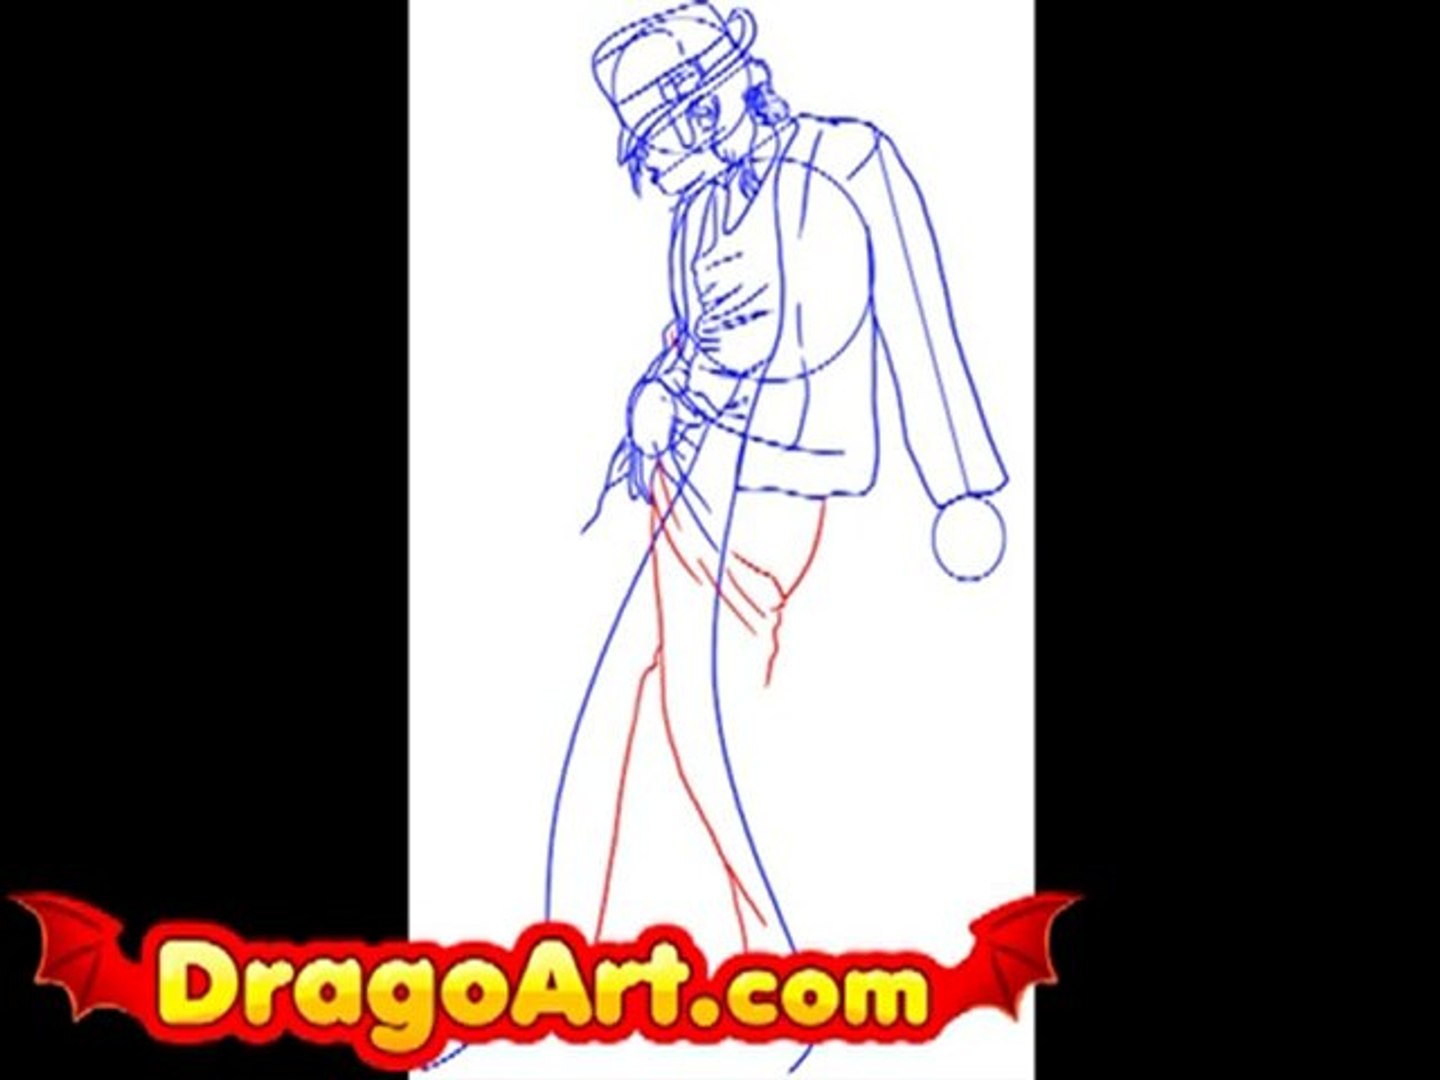 How To Draw Michael Jackson, Step by Step, Drawing Guide, by Dawn - DragoArt